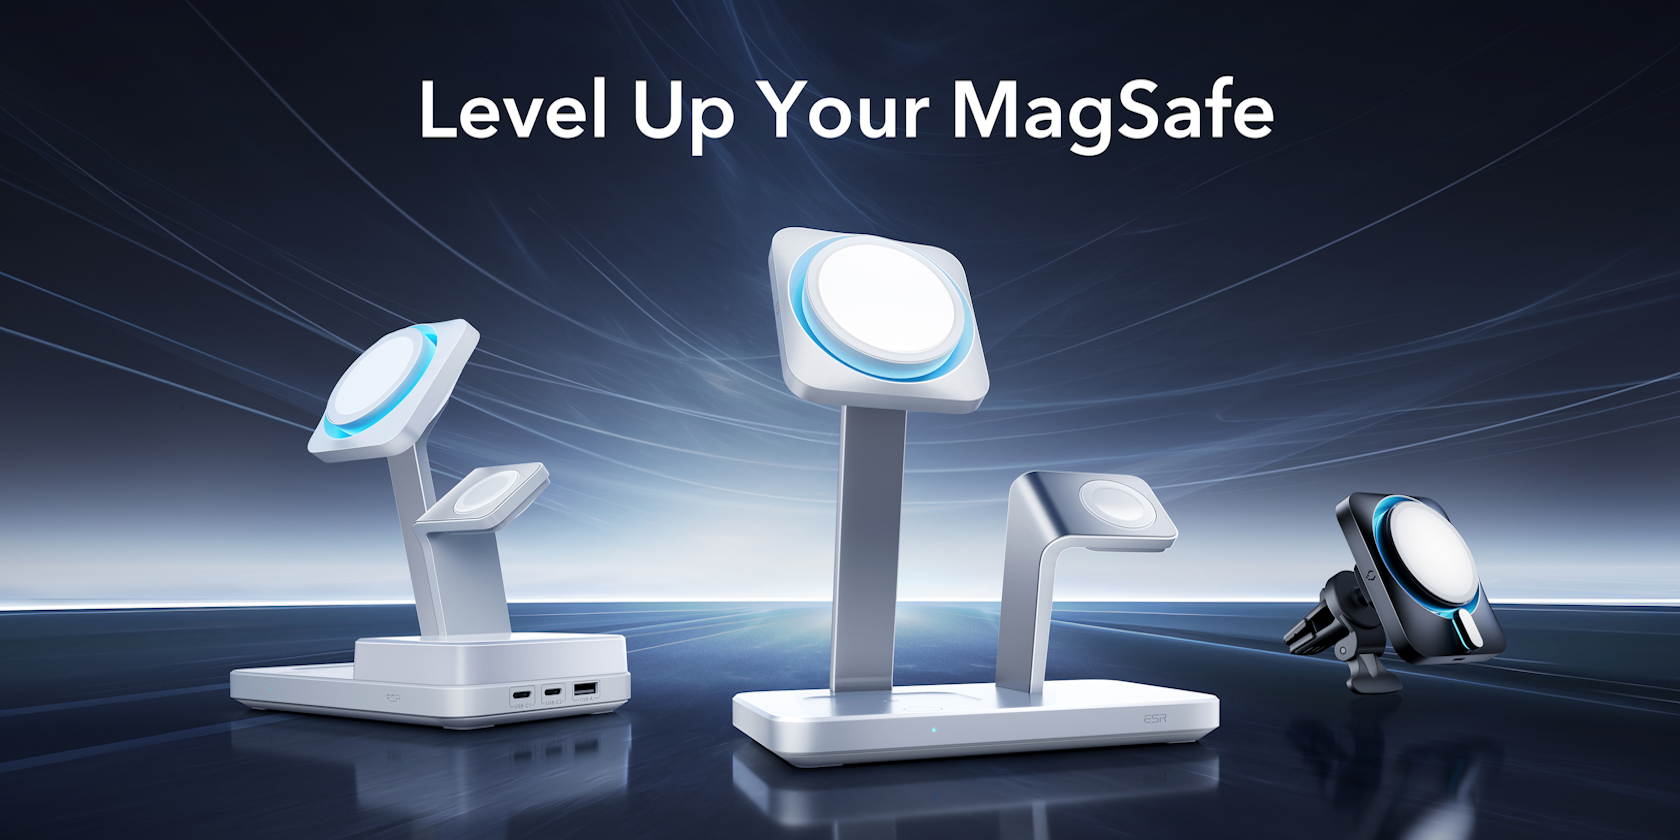 Level up your MagSafe